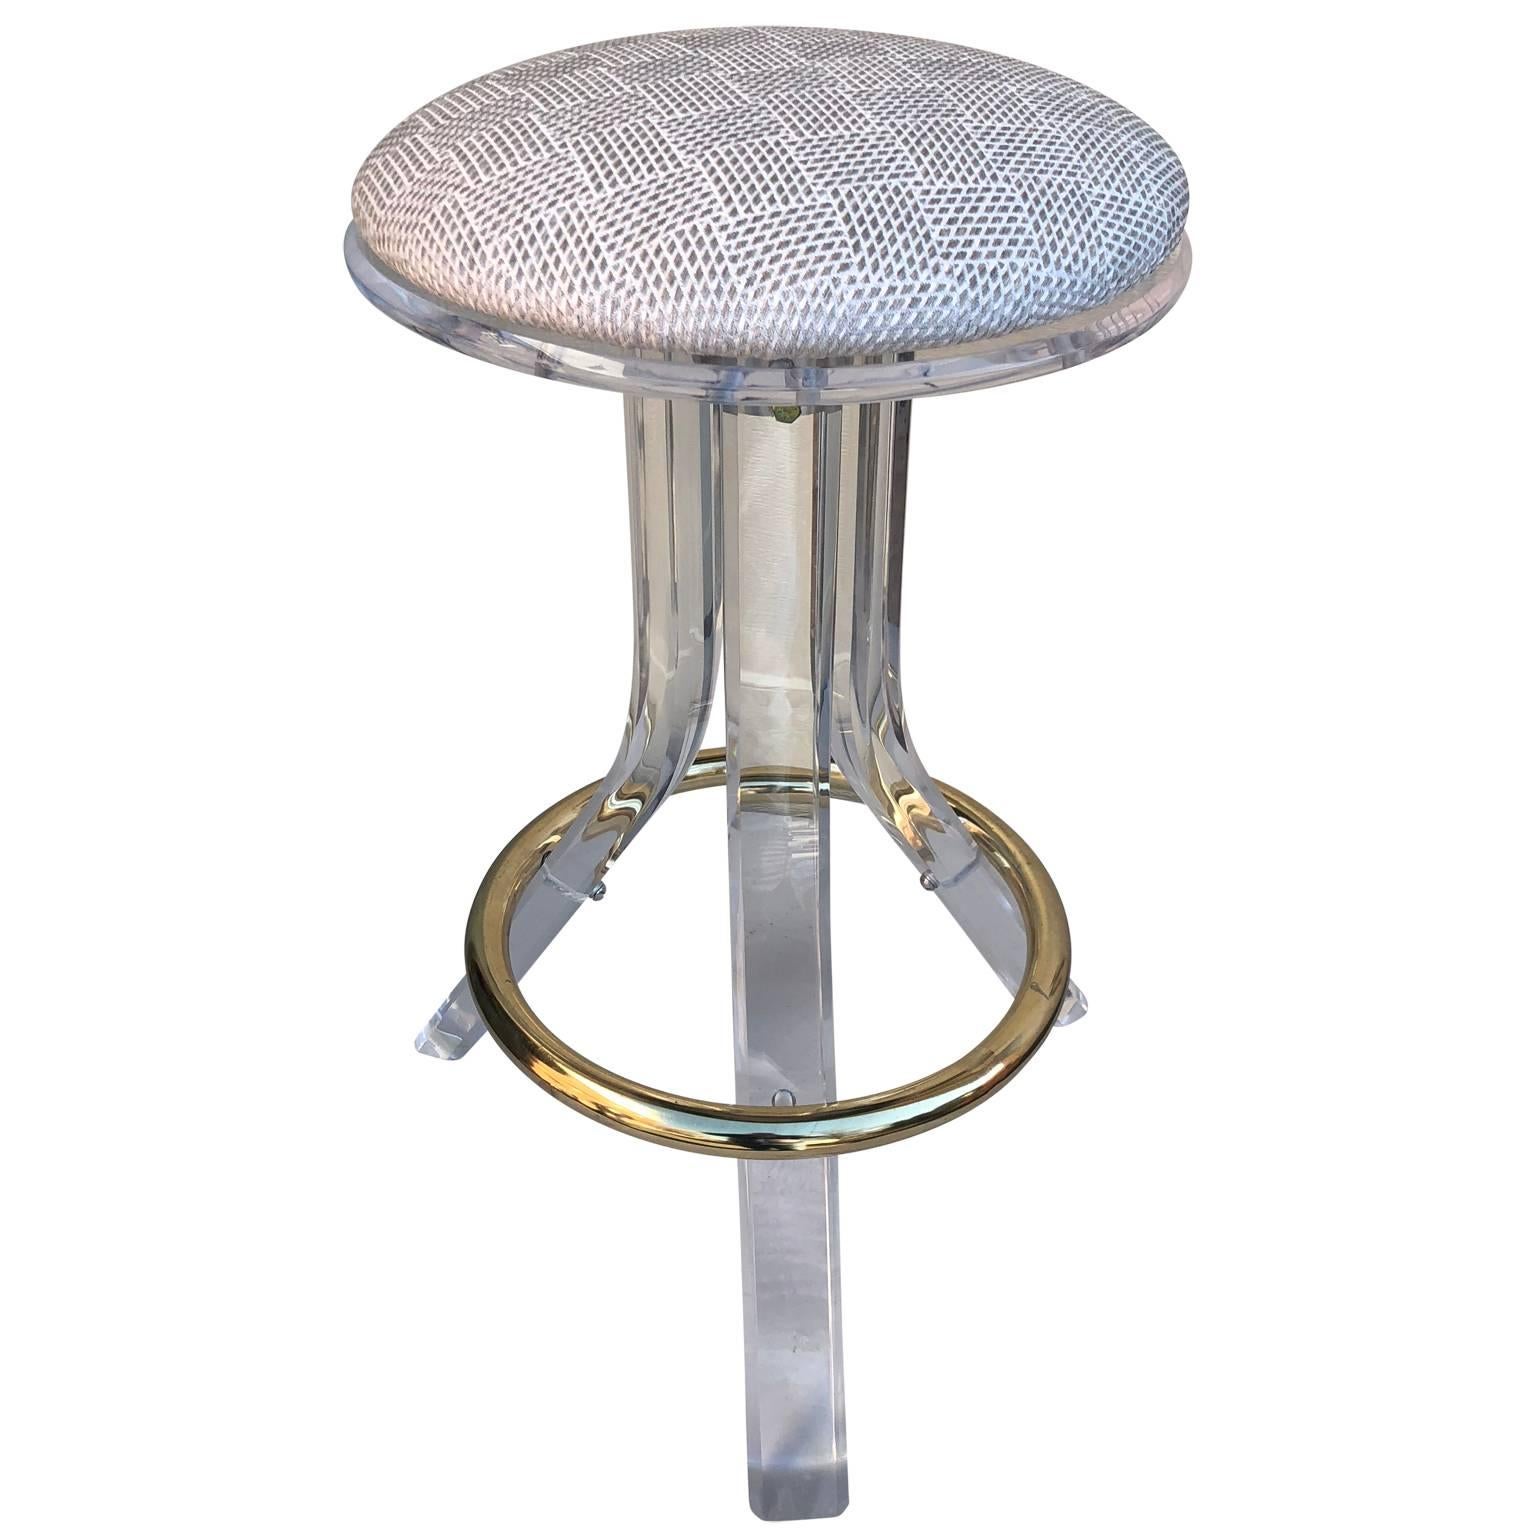 Hand-Crafted Single 1970s Lucite Vanity or Bar Stool with Brass Hardware